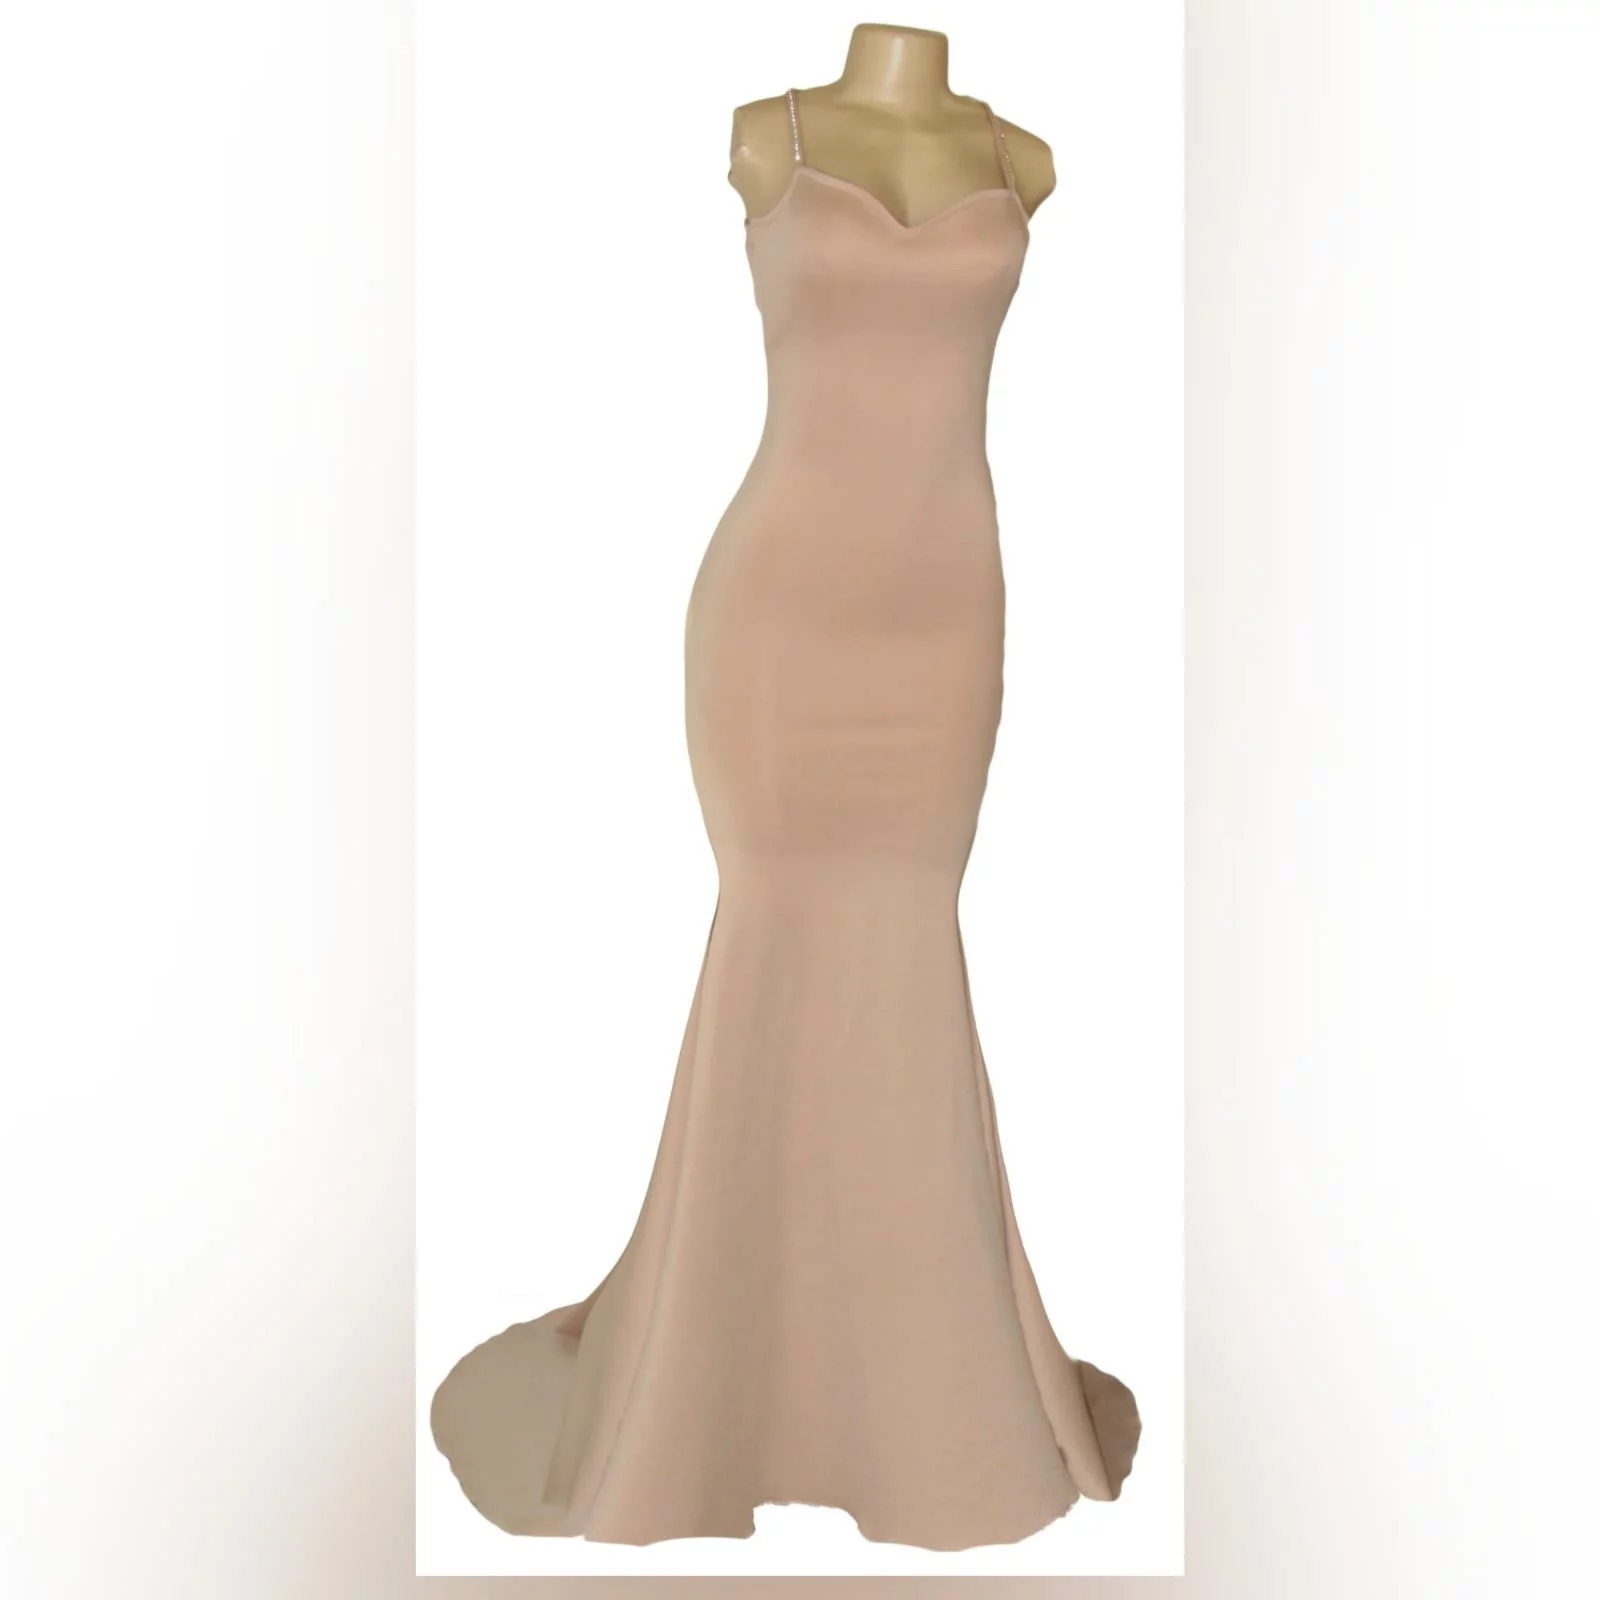 Nude simple mermaid prom dress 4 nude simple mermaid prom dress with a sweetheart neckline, open back, thin shoulder straps crossed at the back and detailed with diamante. Dress with a train.